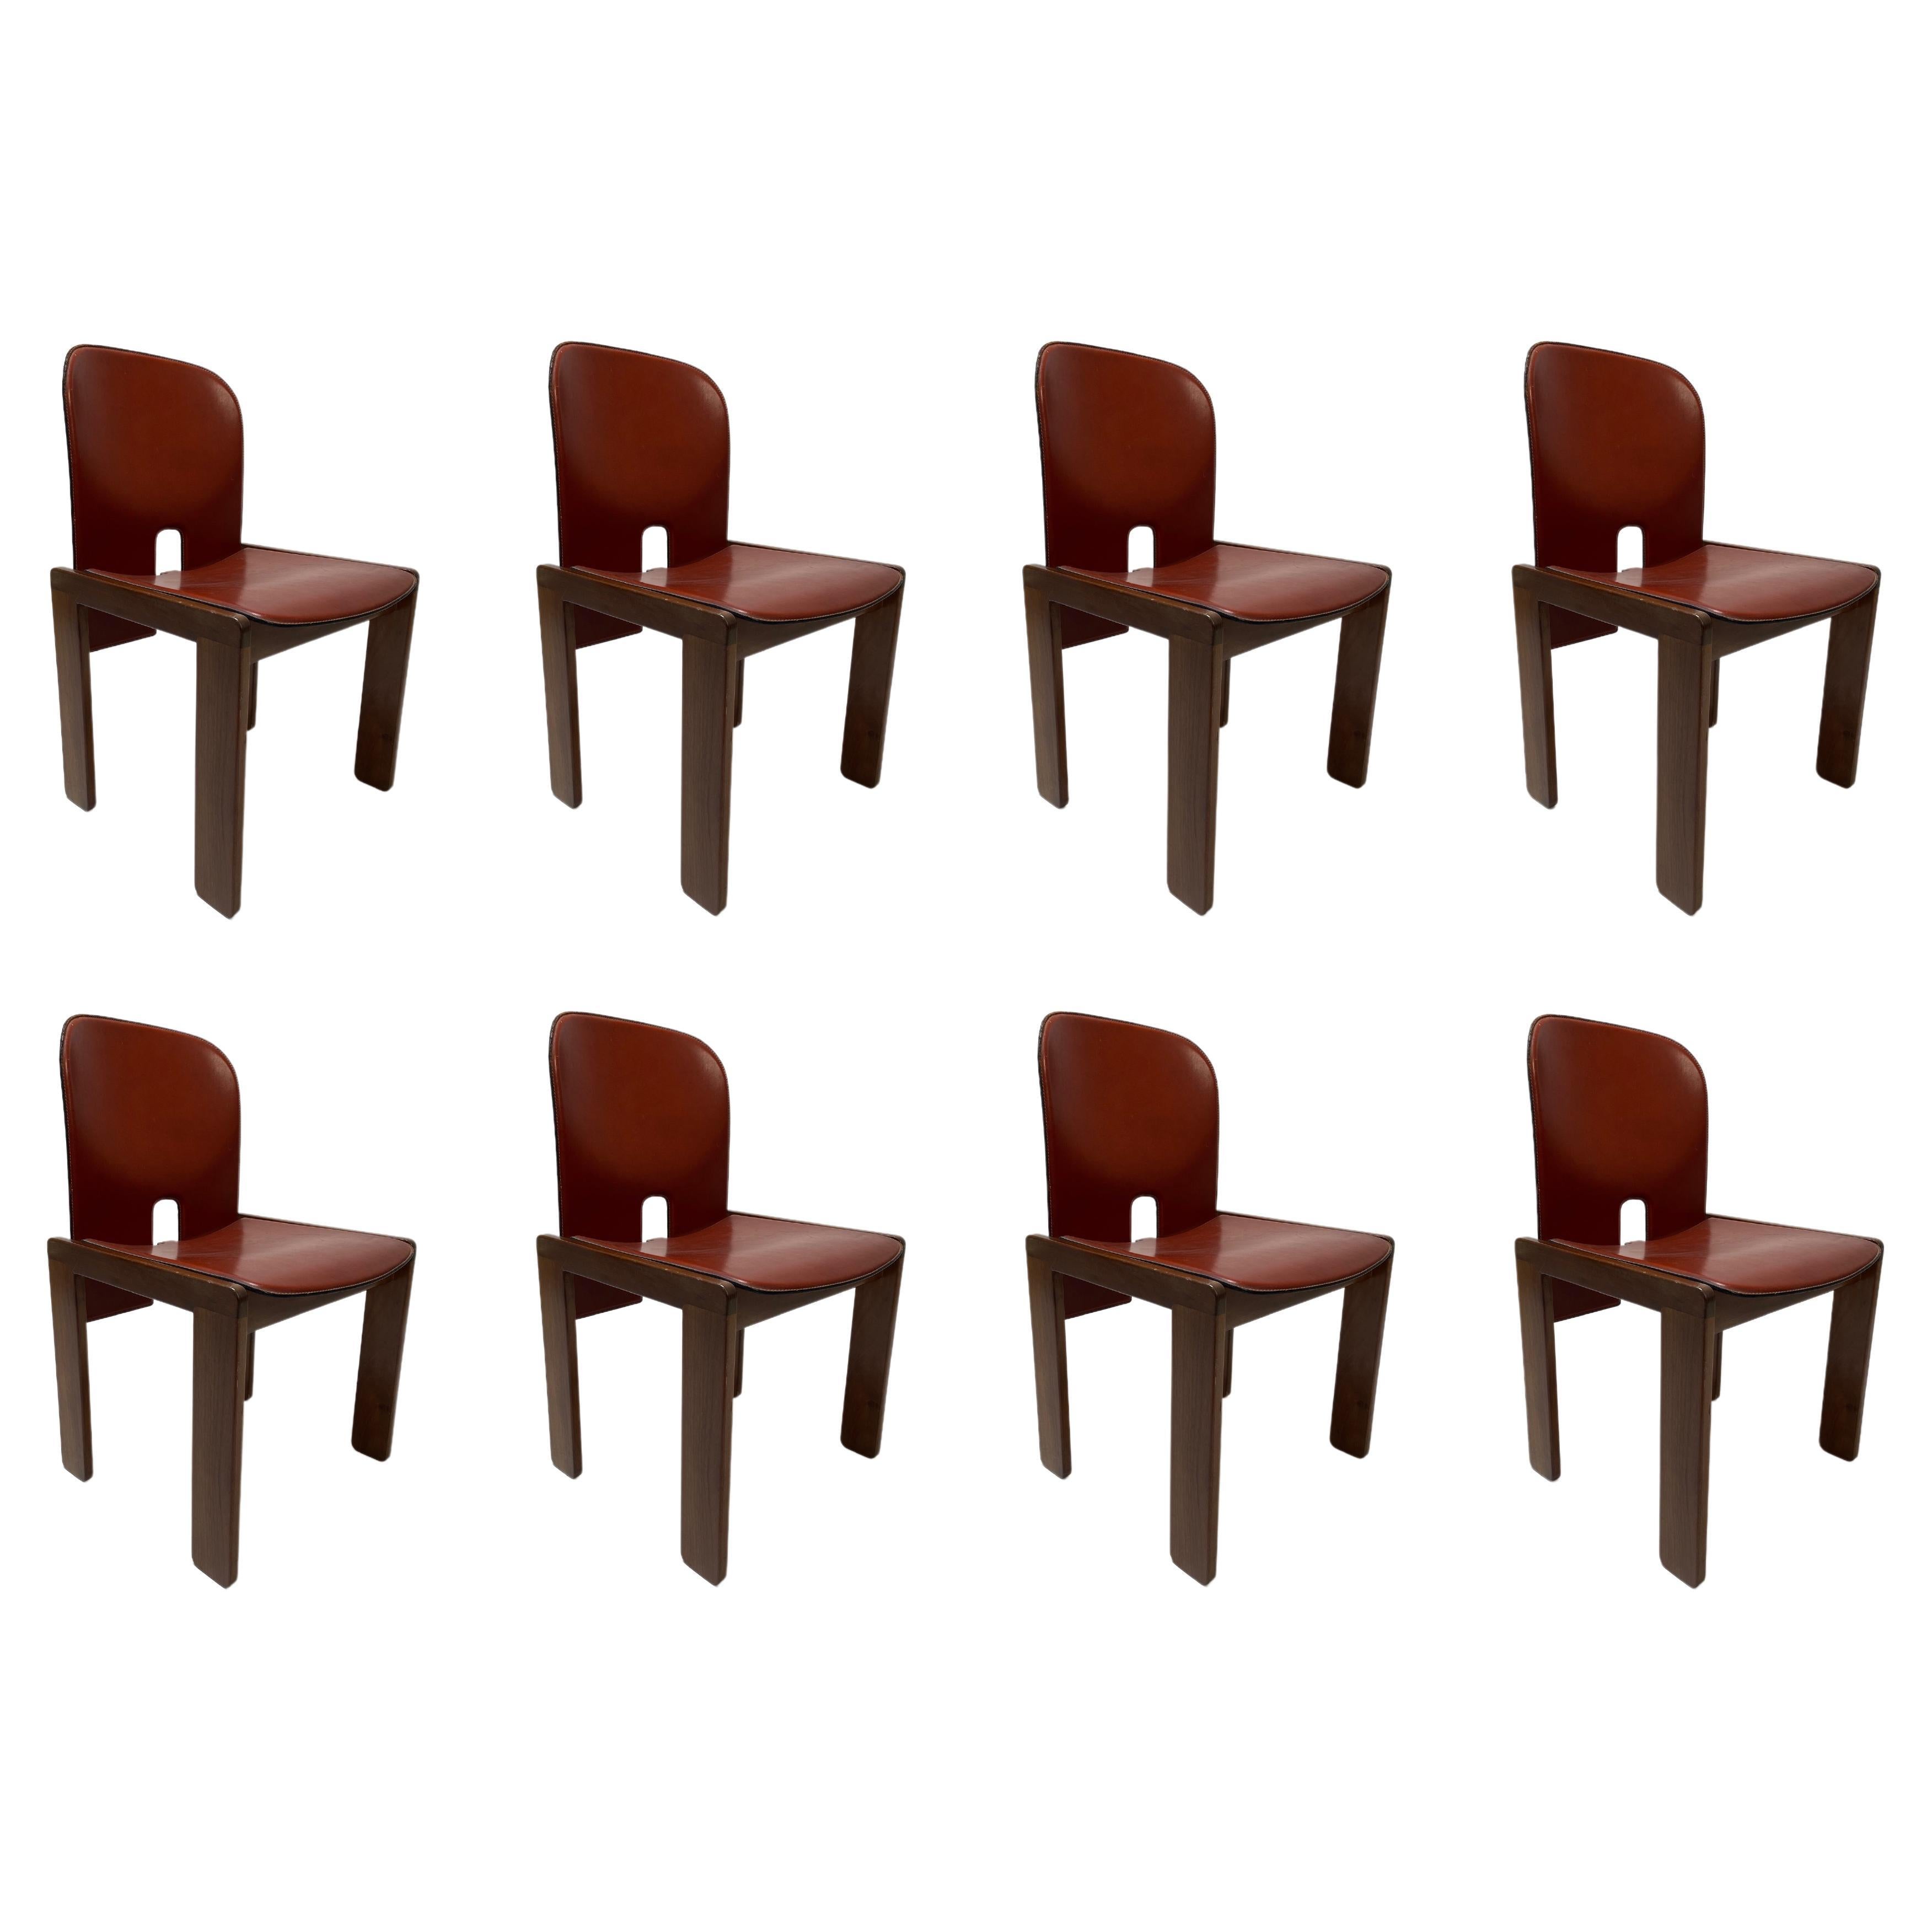 Afra & Tobia Scarpa "121" Dining Chair in Cognac Leather Cassina, 1965, Set of 8 For Sale